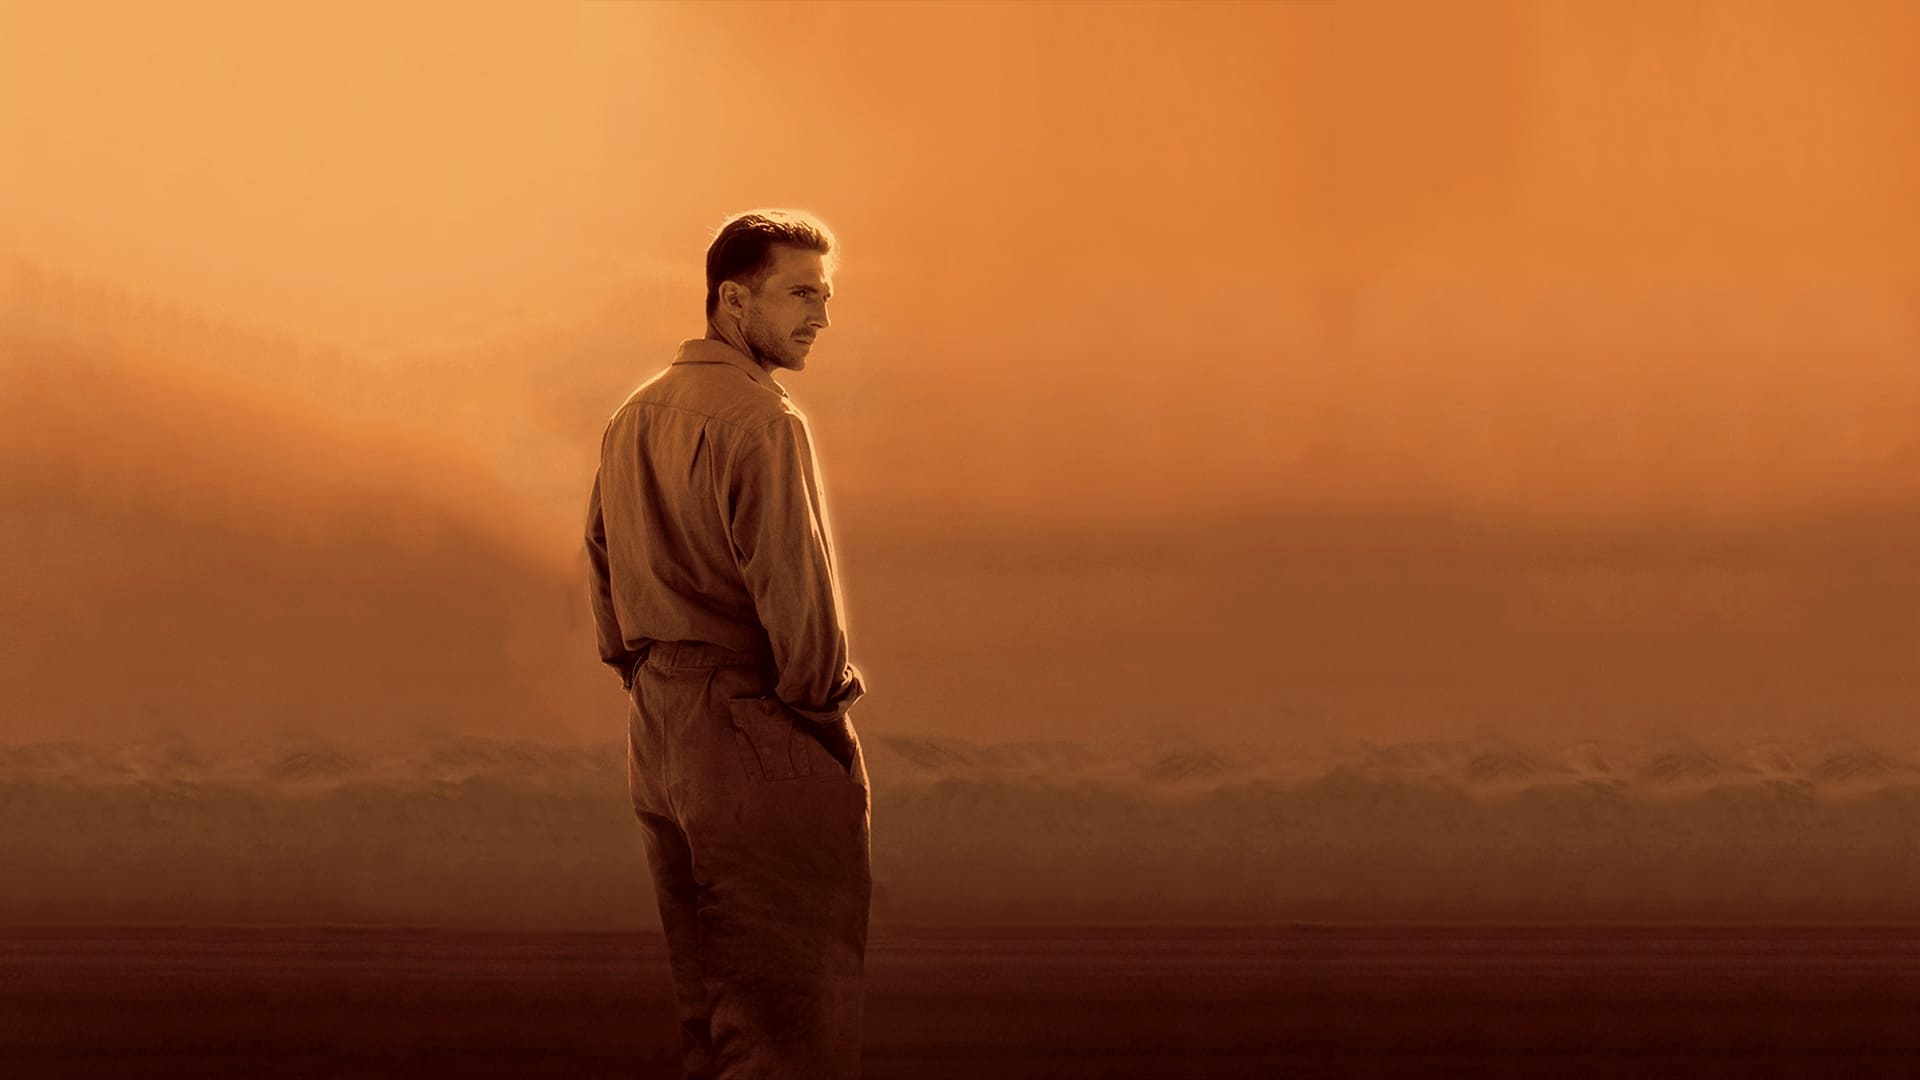 1996 The English Patient